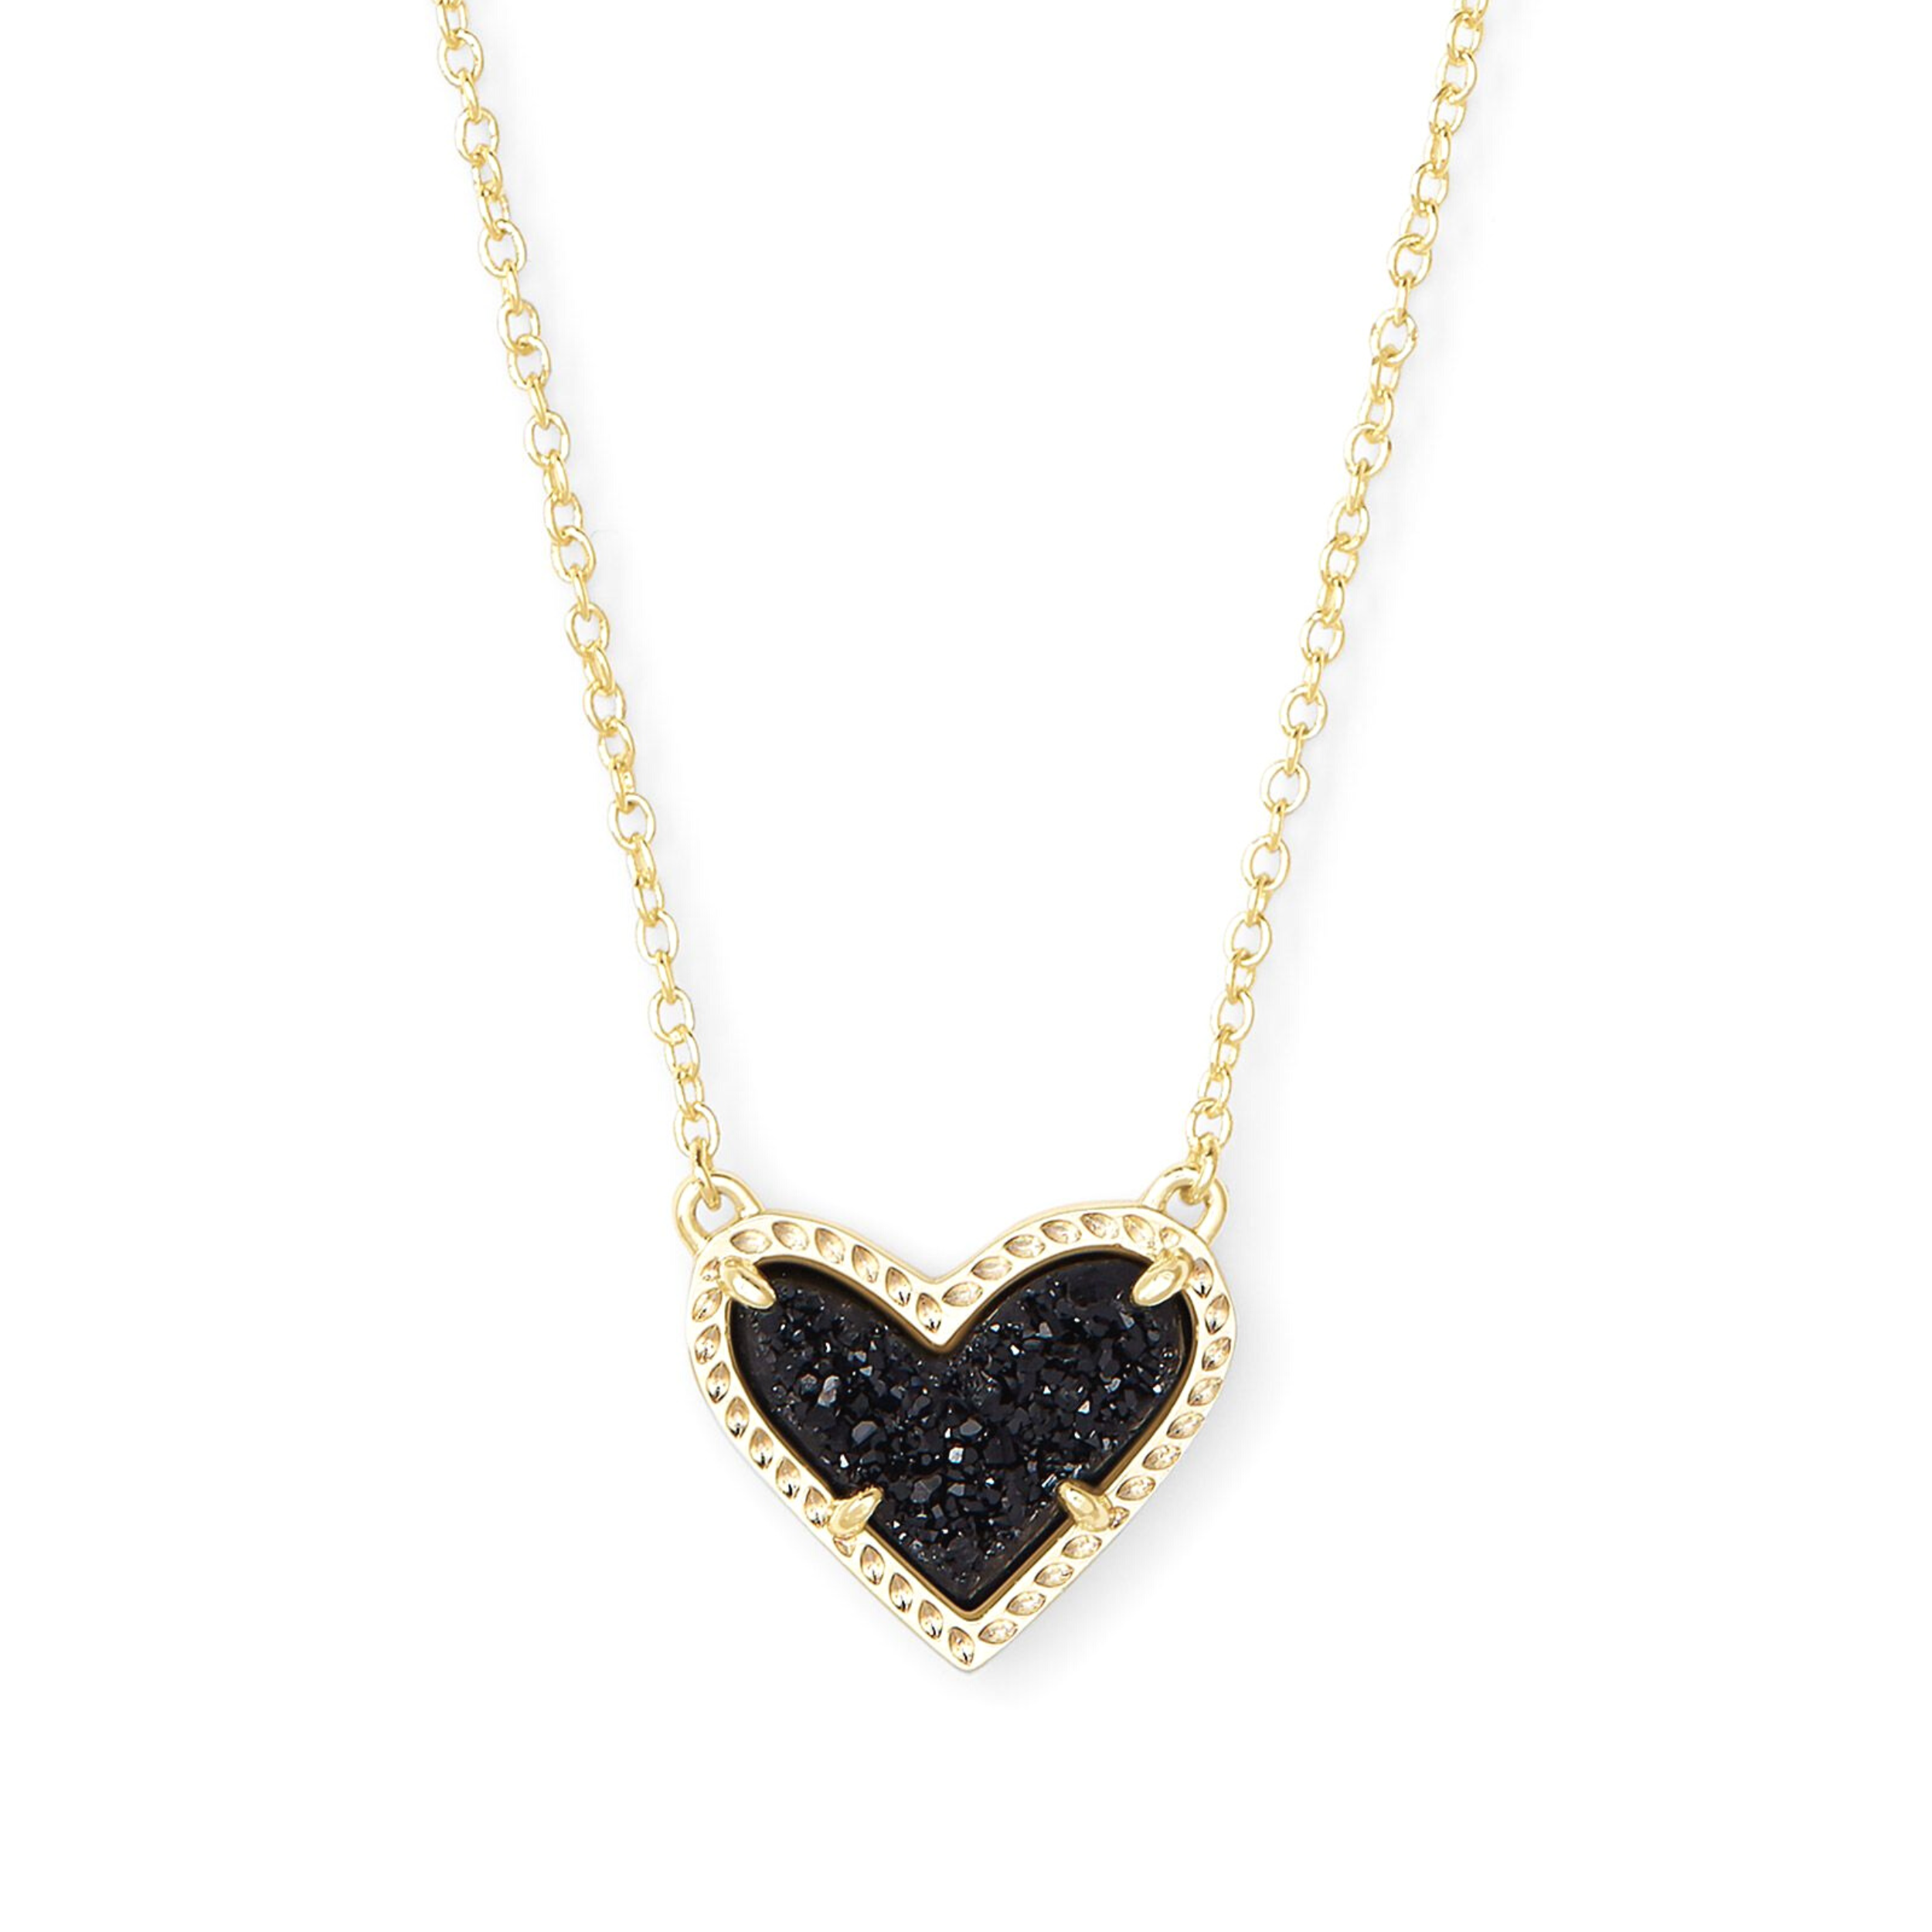 Kendra Scott | Ari Heart Gold Pendant Necklace in Black Drusy - Giddy Up Glamour Boutique